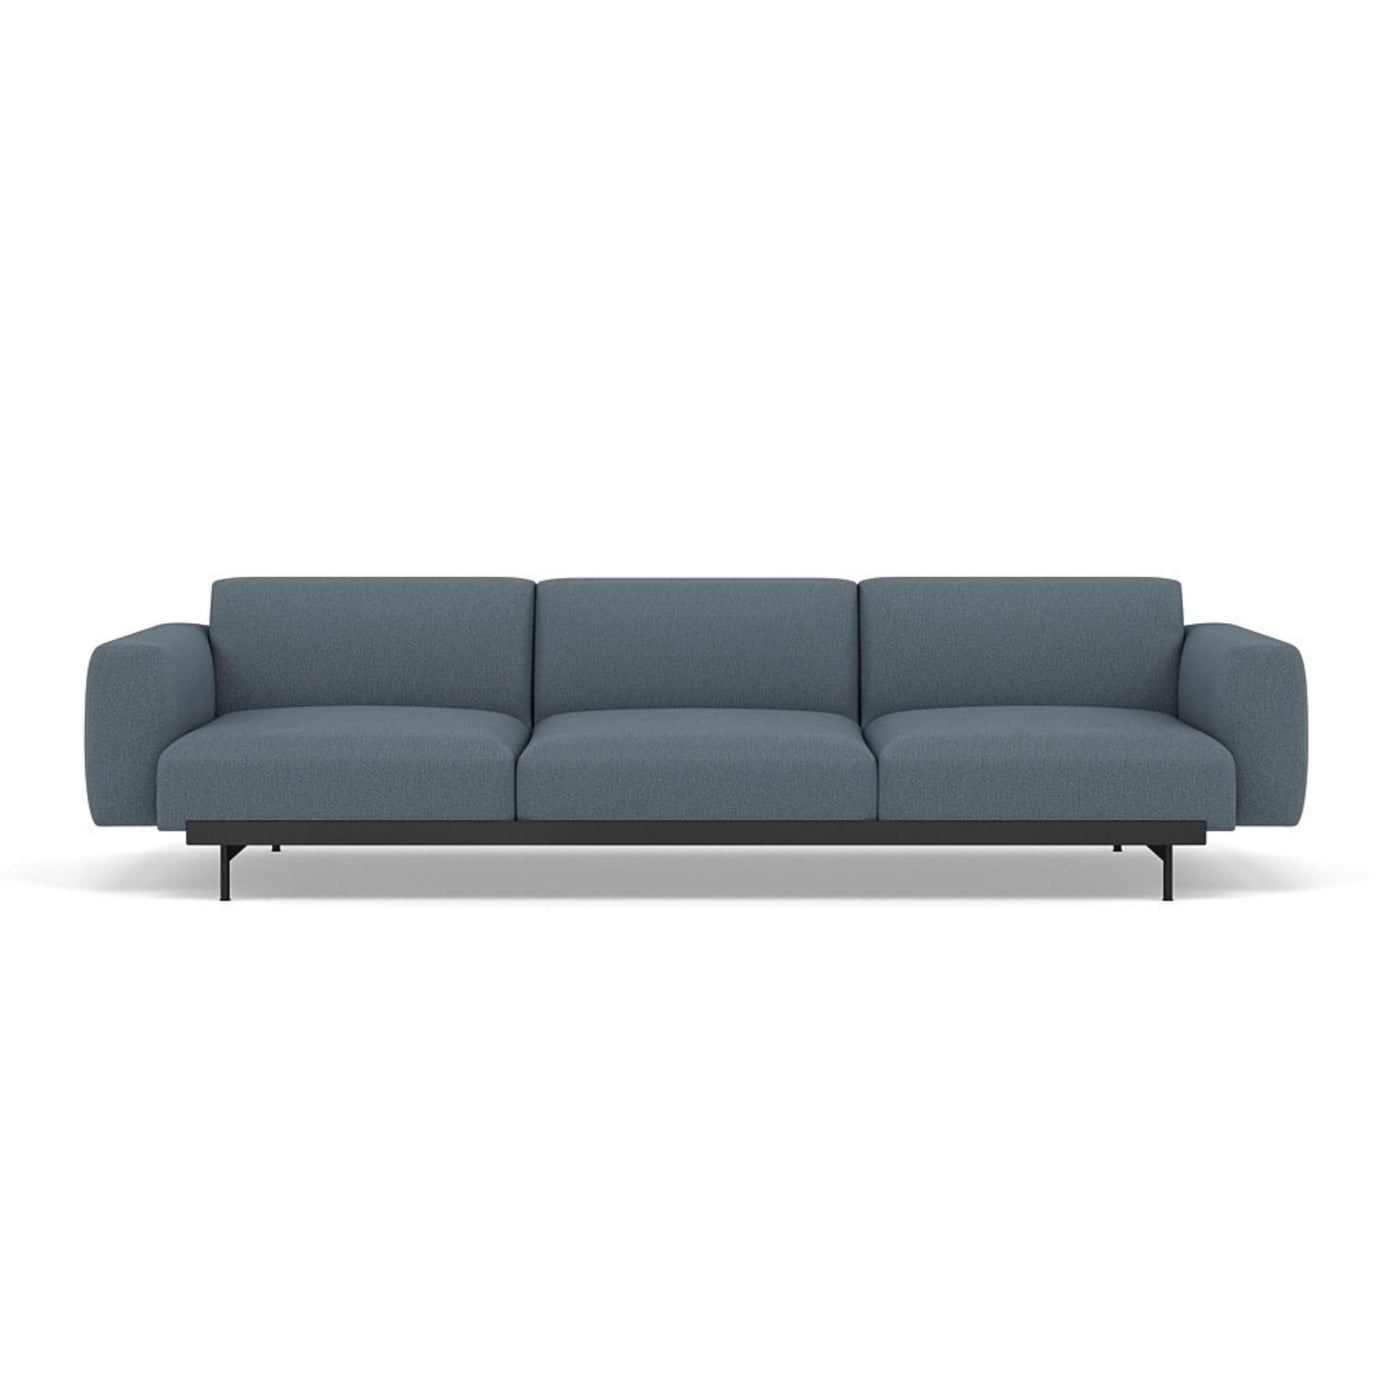 Muuto In Situ Sofa 3 seater configuration 1 in clay 1 fabric. Made to order at someday designs. #colour_clay-1-blue